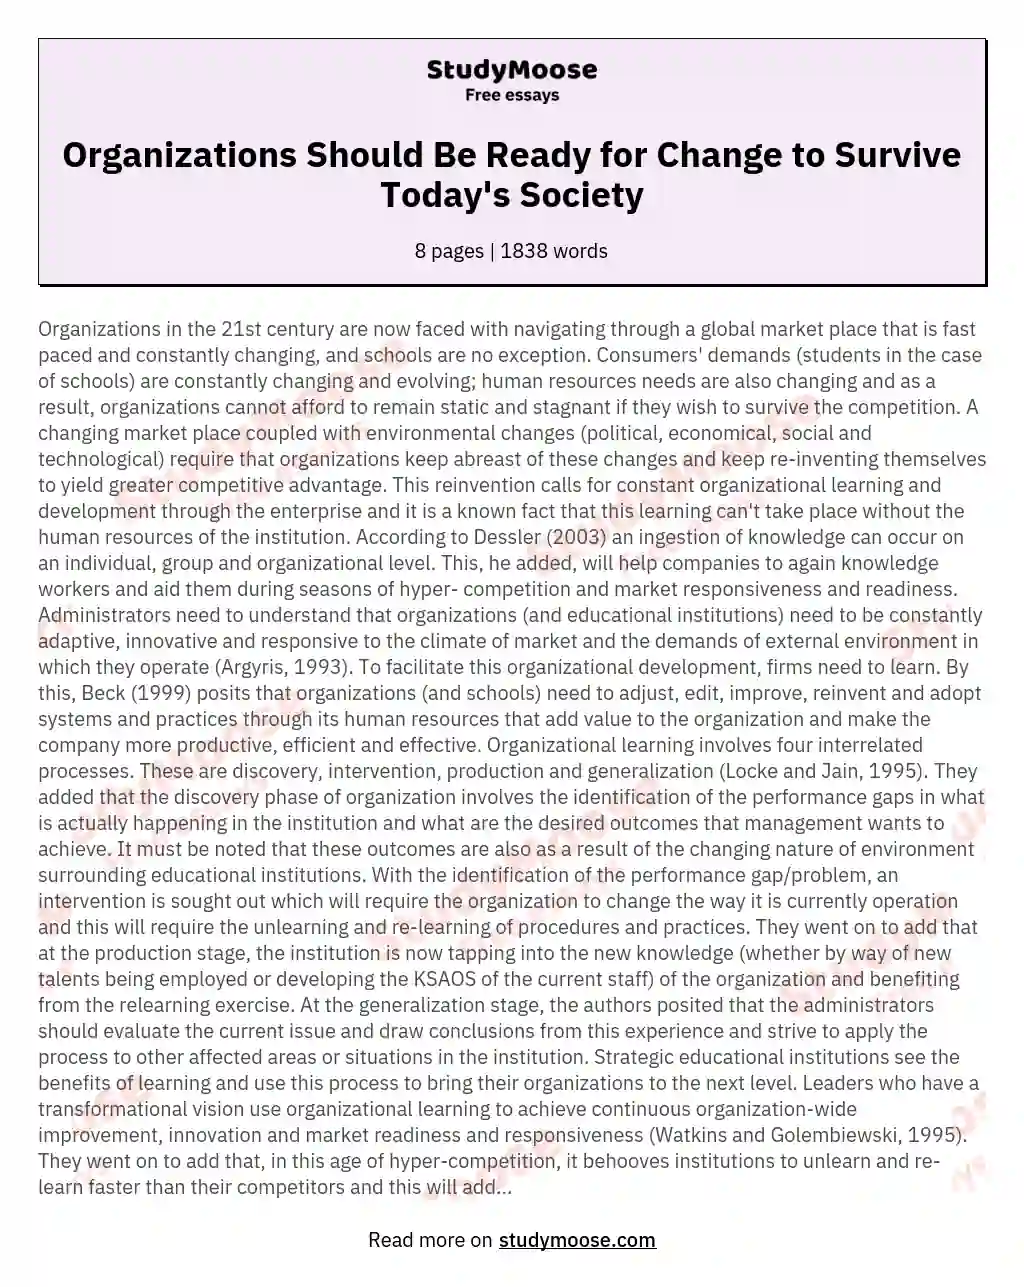 Organizations Should Be Ready for Change to Survive Today's Society essay